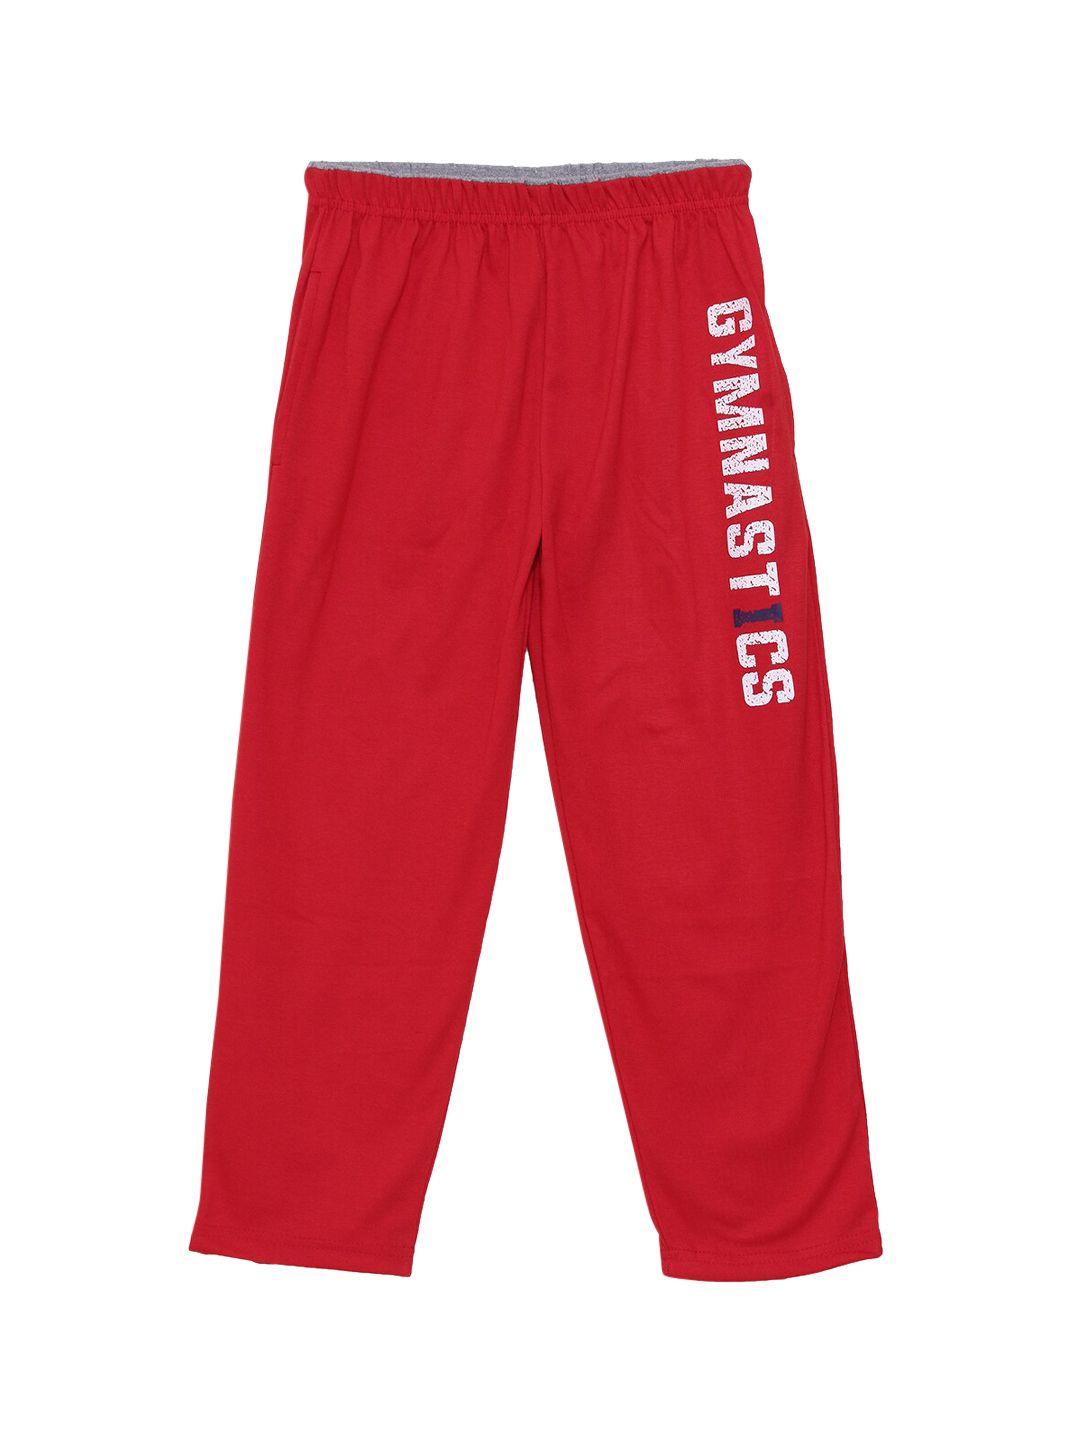 fashionable-boys-red-&-white-printed-pure-cotton-track-pants